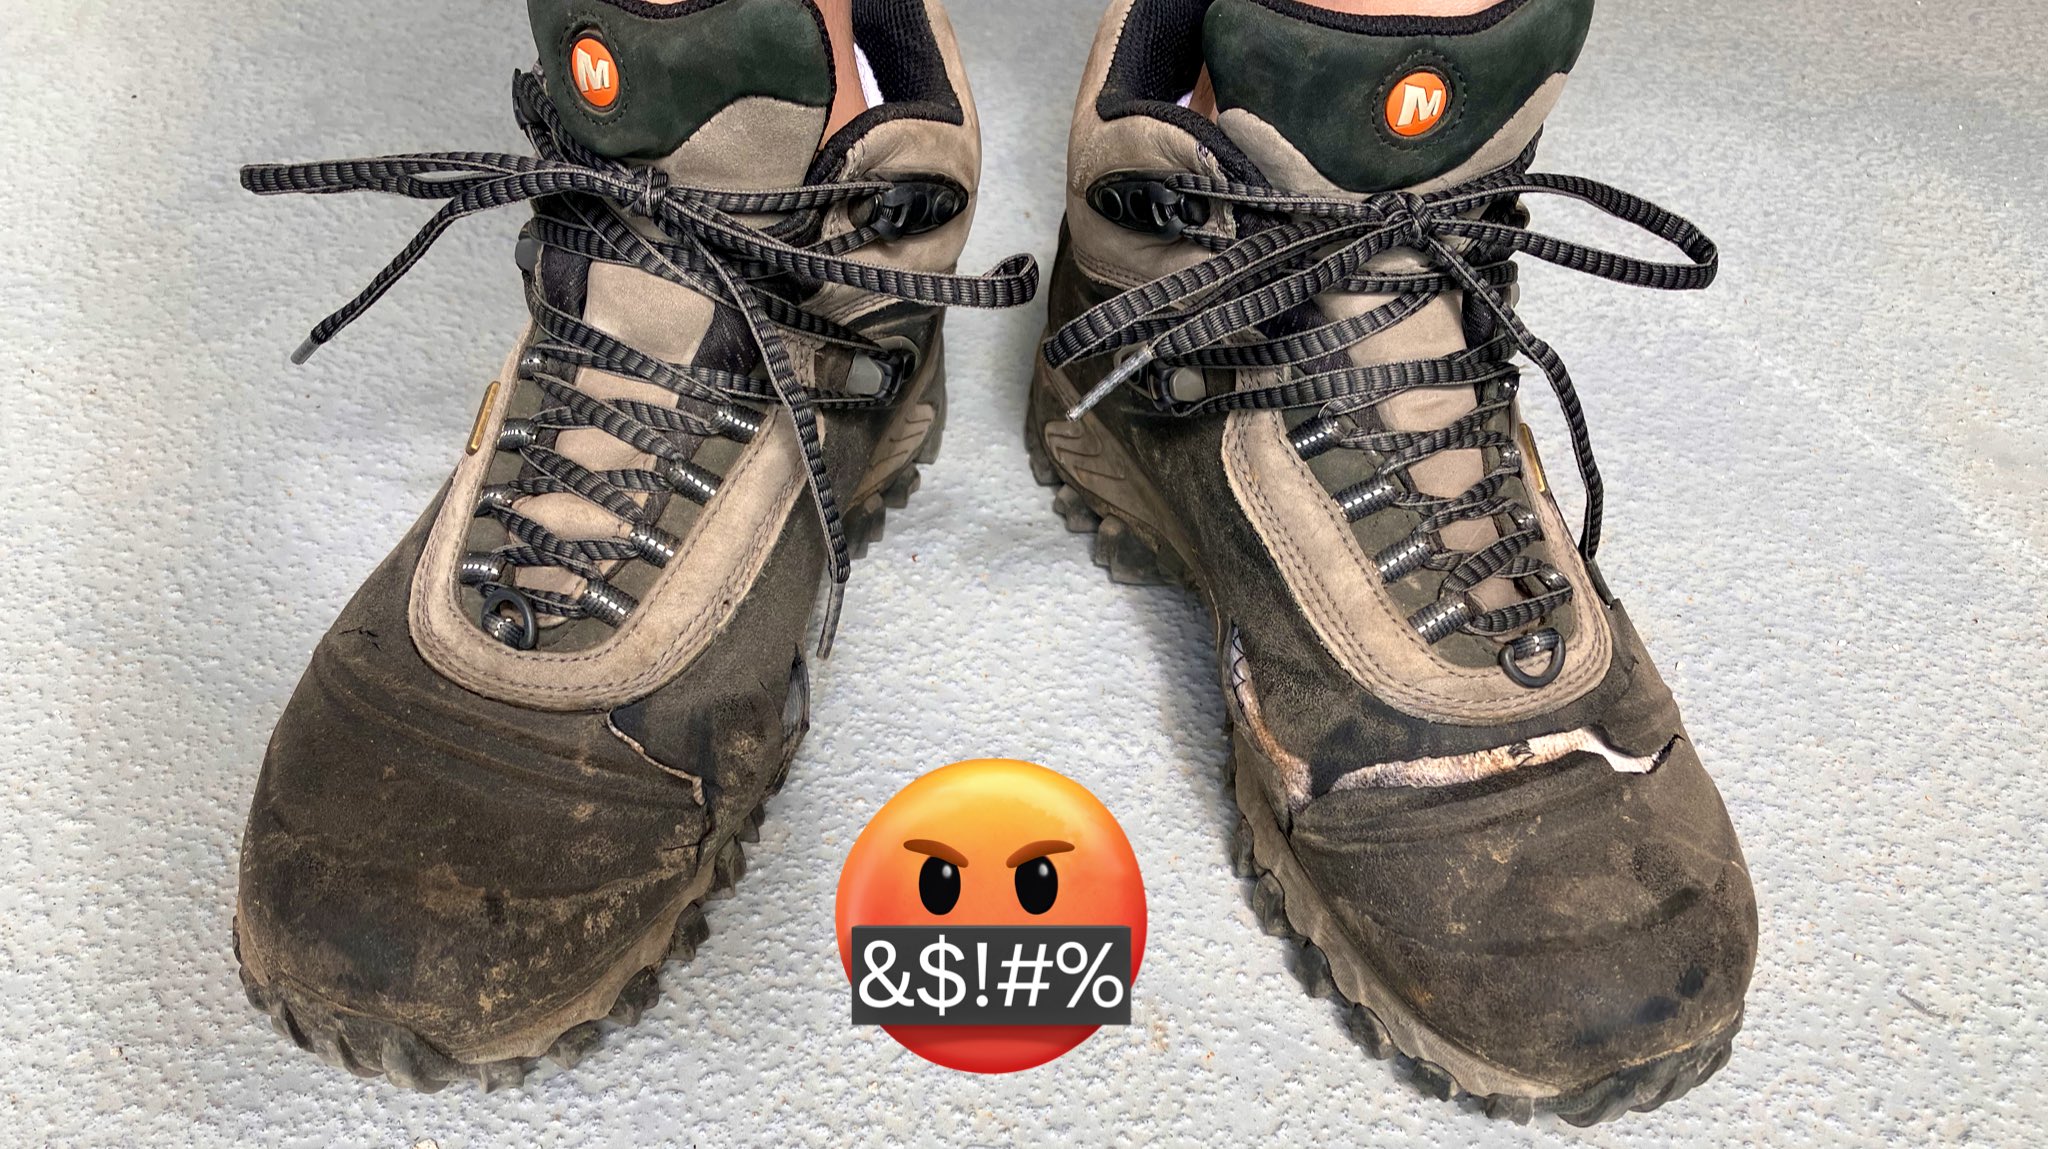 Andrea Tagliasacchi X: "Bought a pair of @MerrellUK #Merrell waterproof hiking boots, hoping for them to last a lifetime. Used less than 10 times… they their time mostly in my